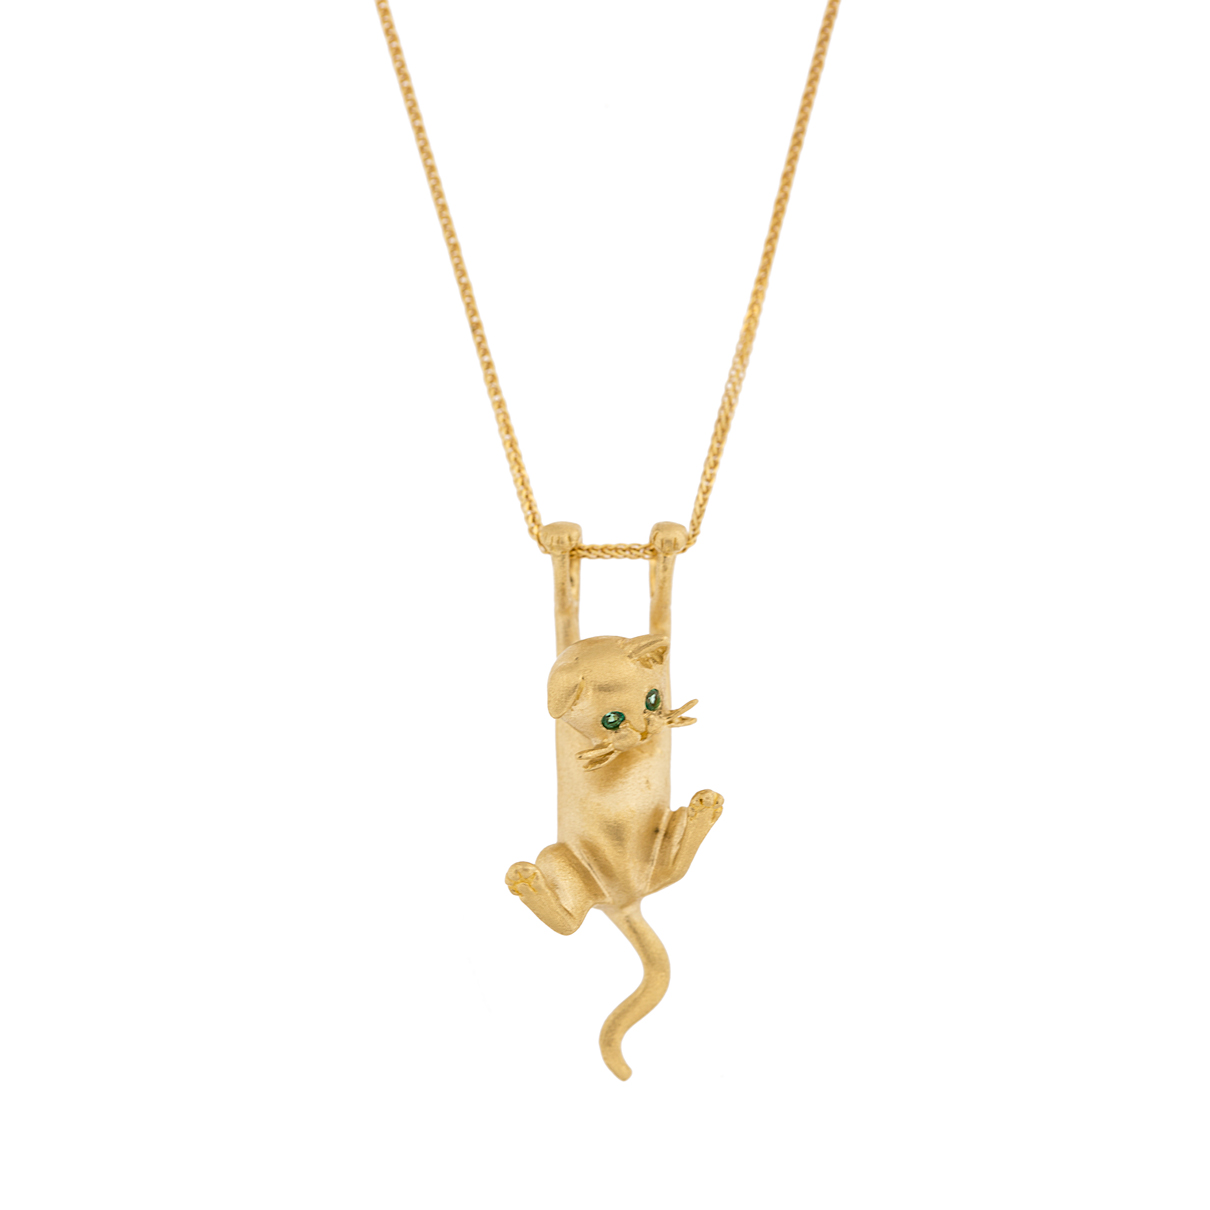 Just Hangin' Kitty Necklace